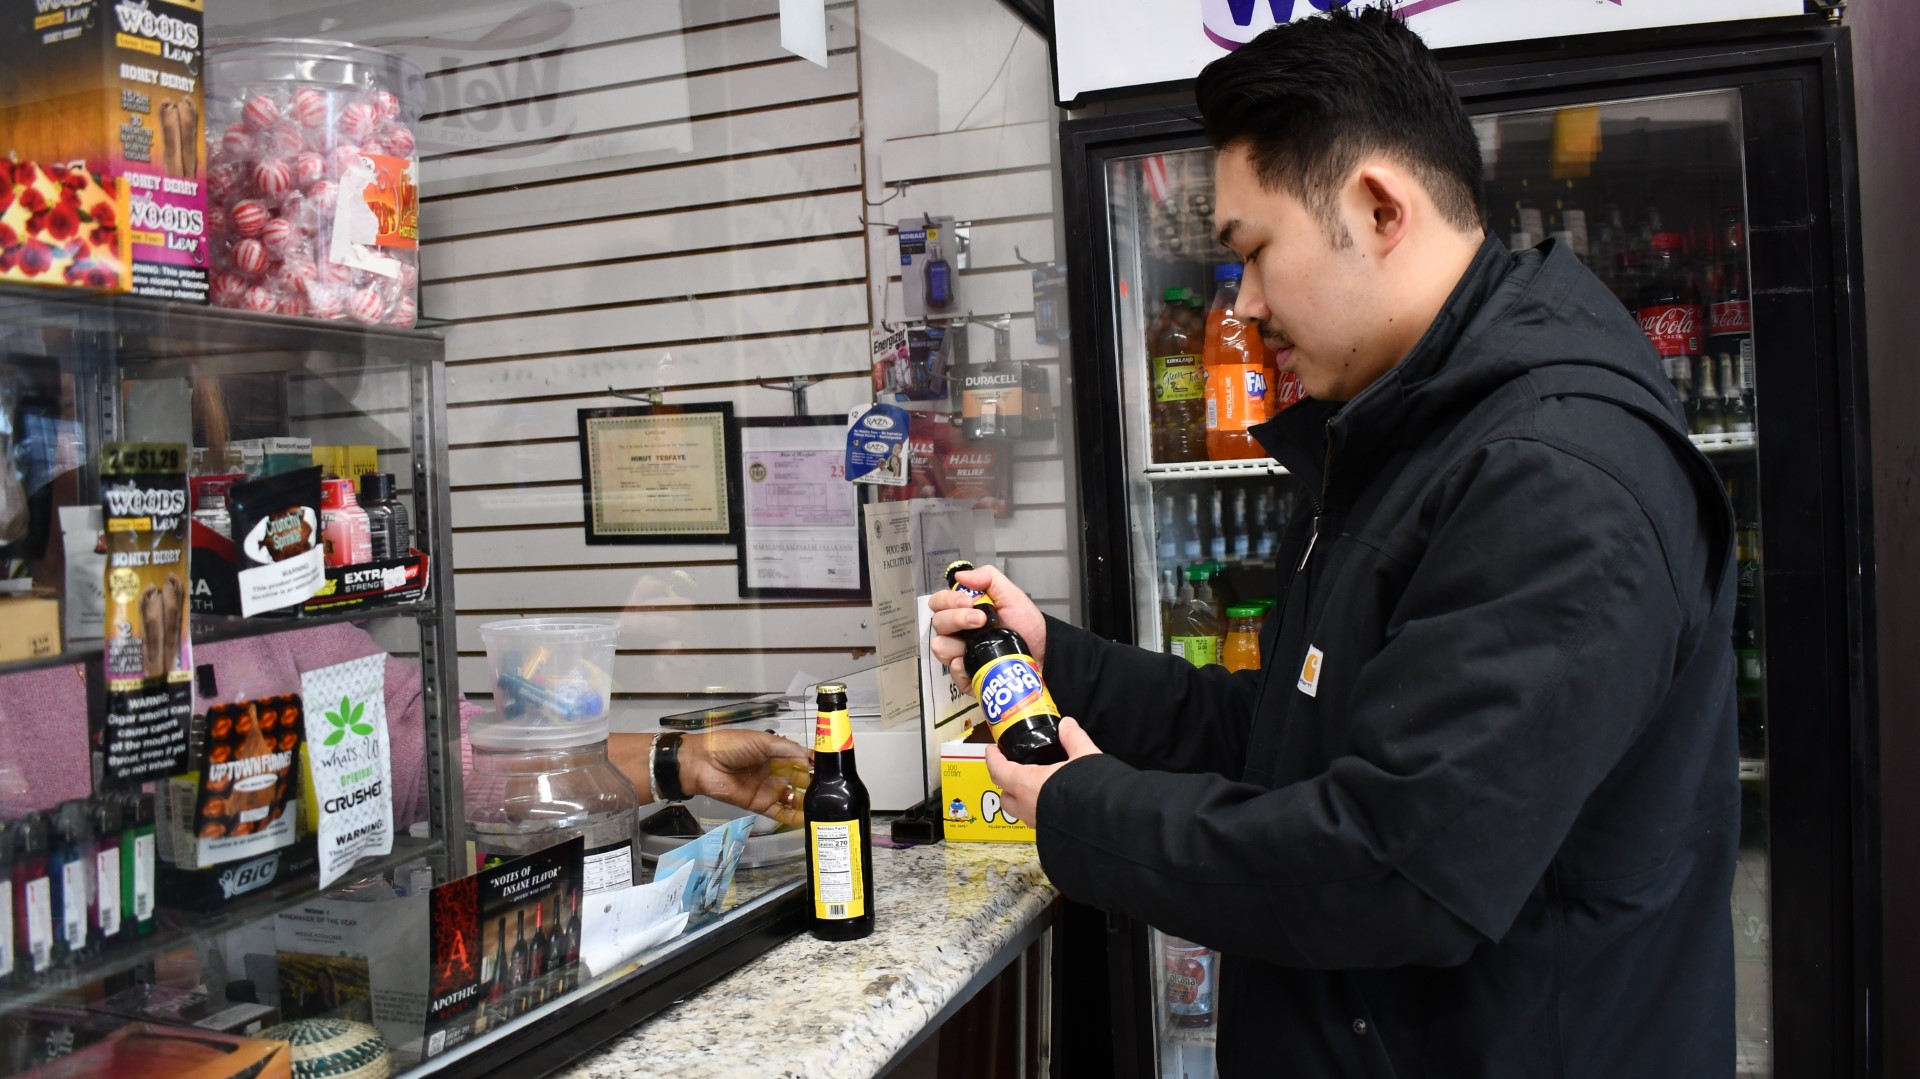 A customer purchasing beverages at the checkout window.